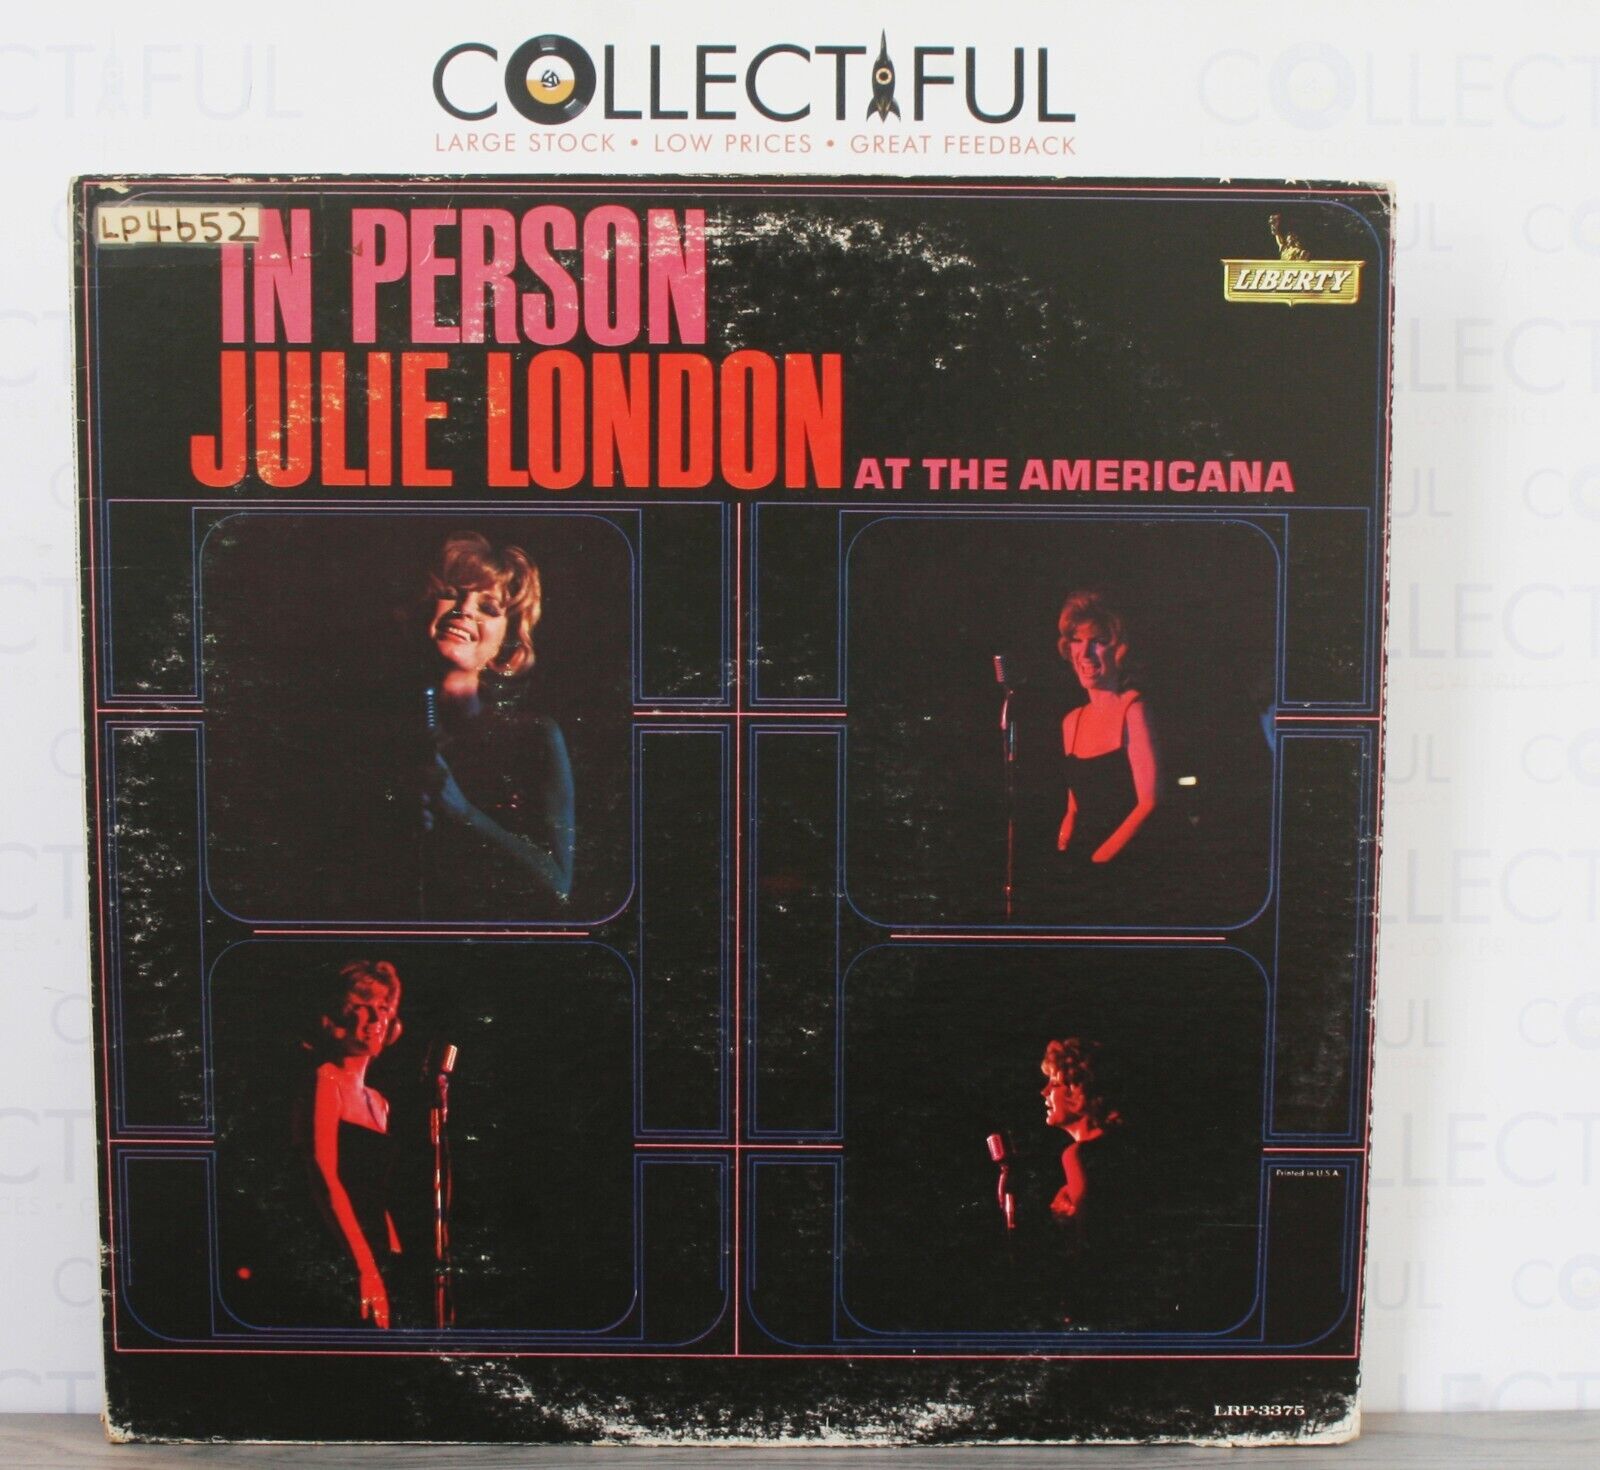 JULIE LONDON - IN PERSON AT THE AMERICANA - 1964 *WHITE LBL AUDITION PROMO* LP🔥